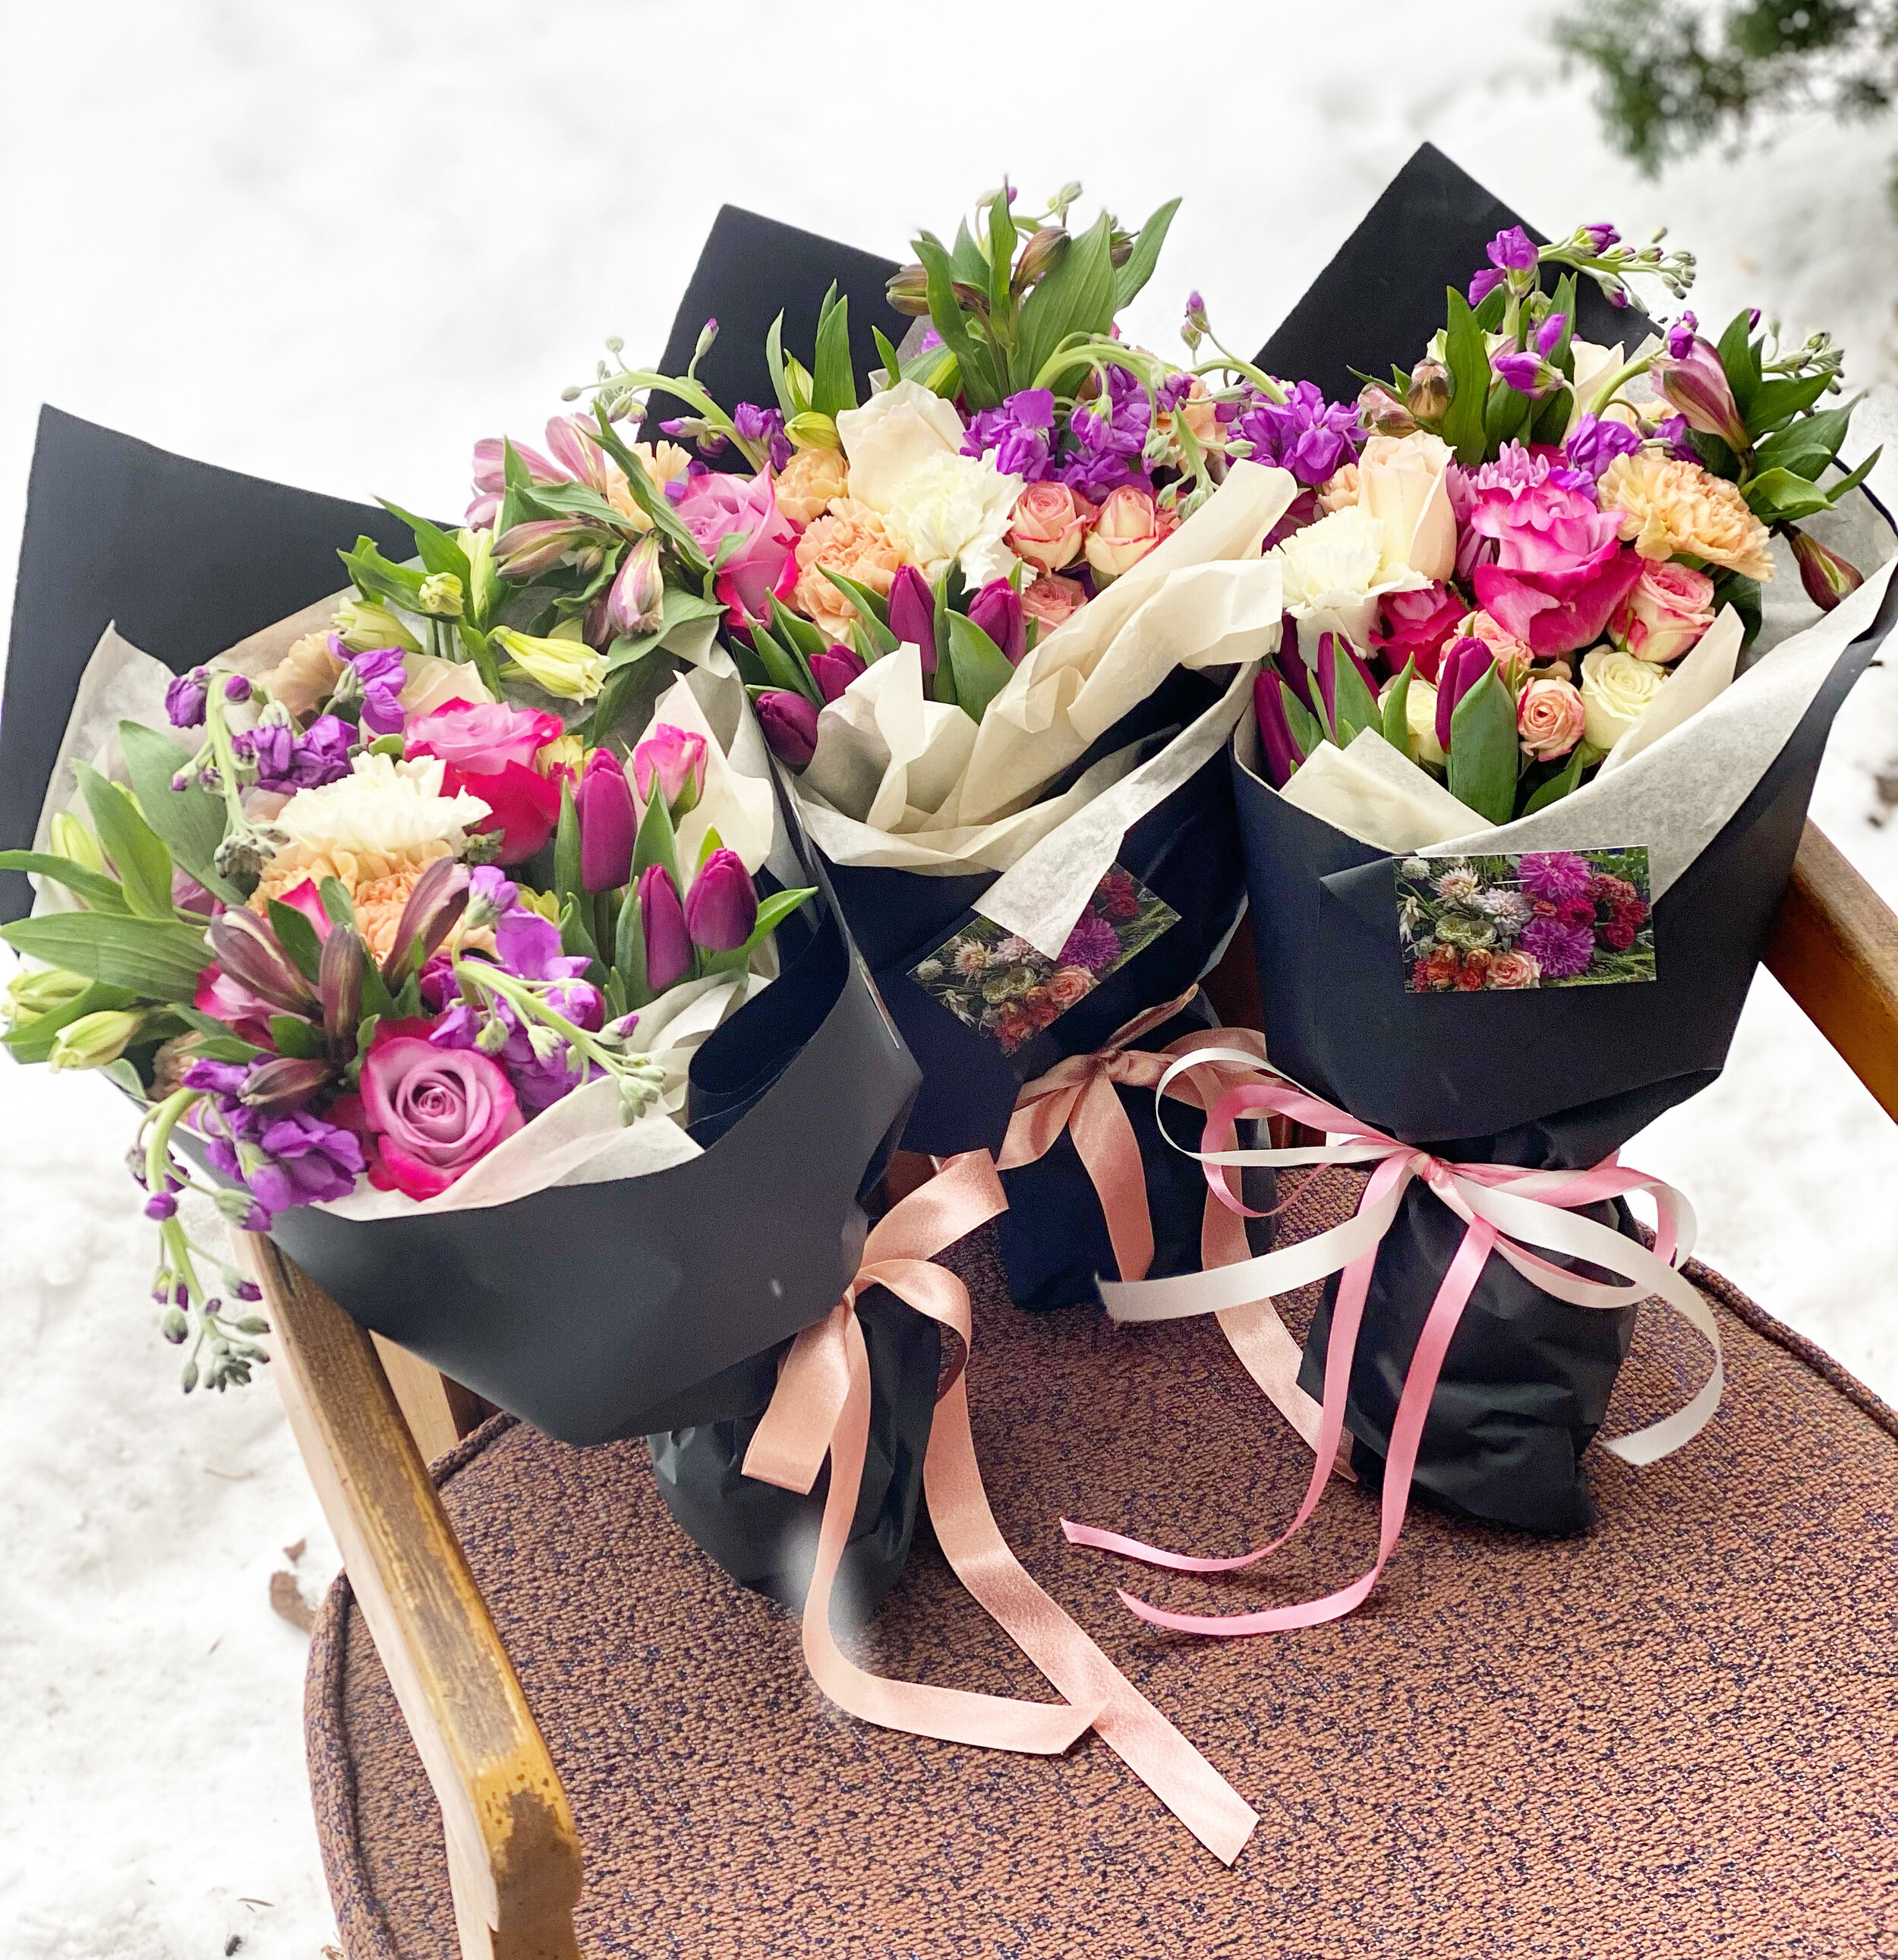 Top Four Flower Delivery Services in Chicago - Lizzy Fay